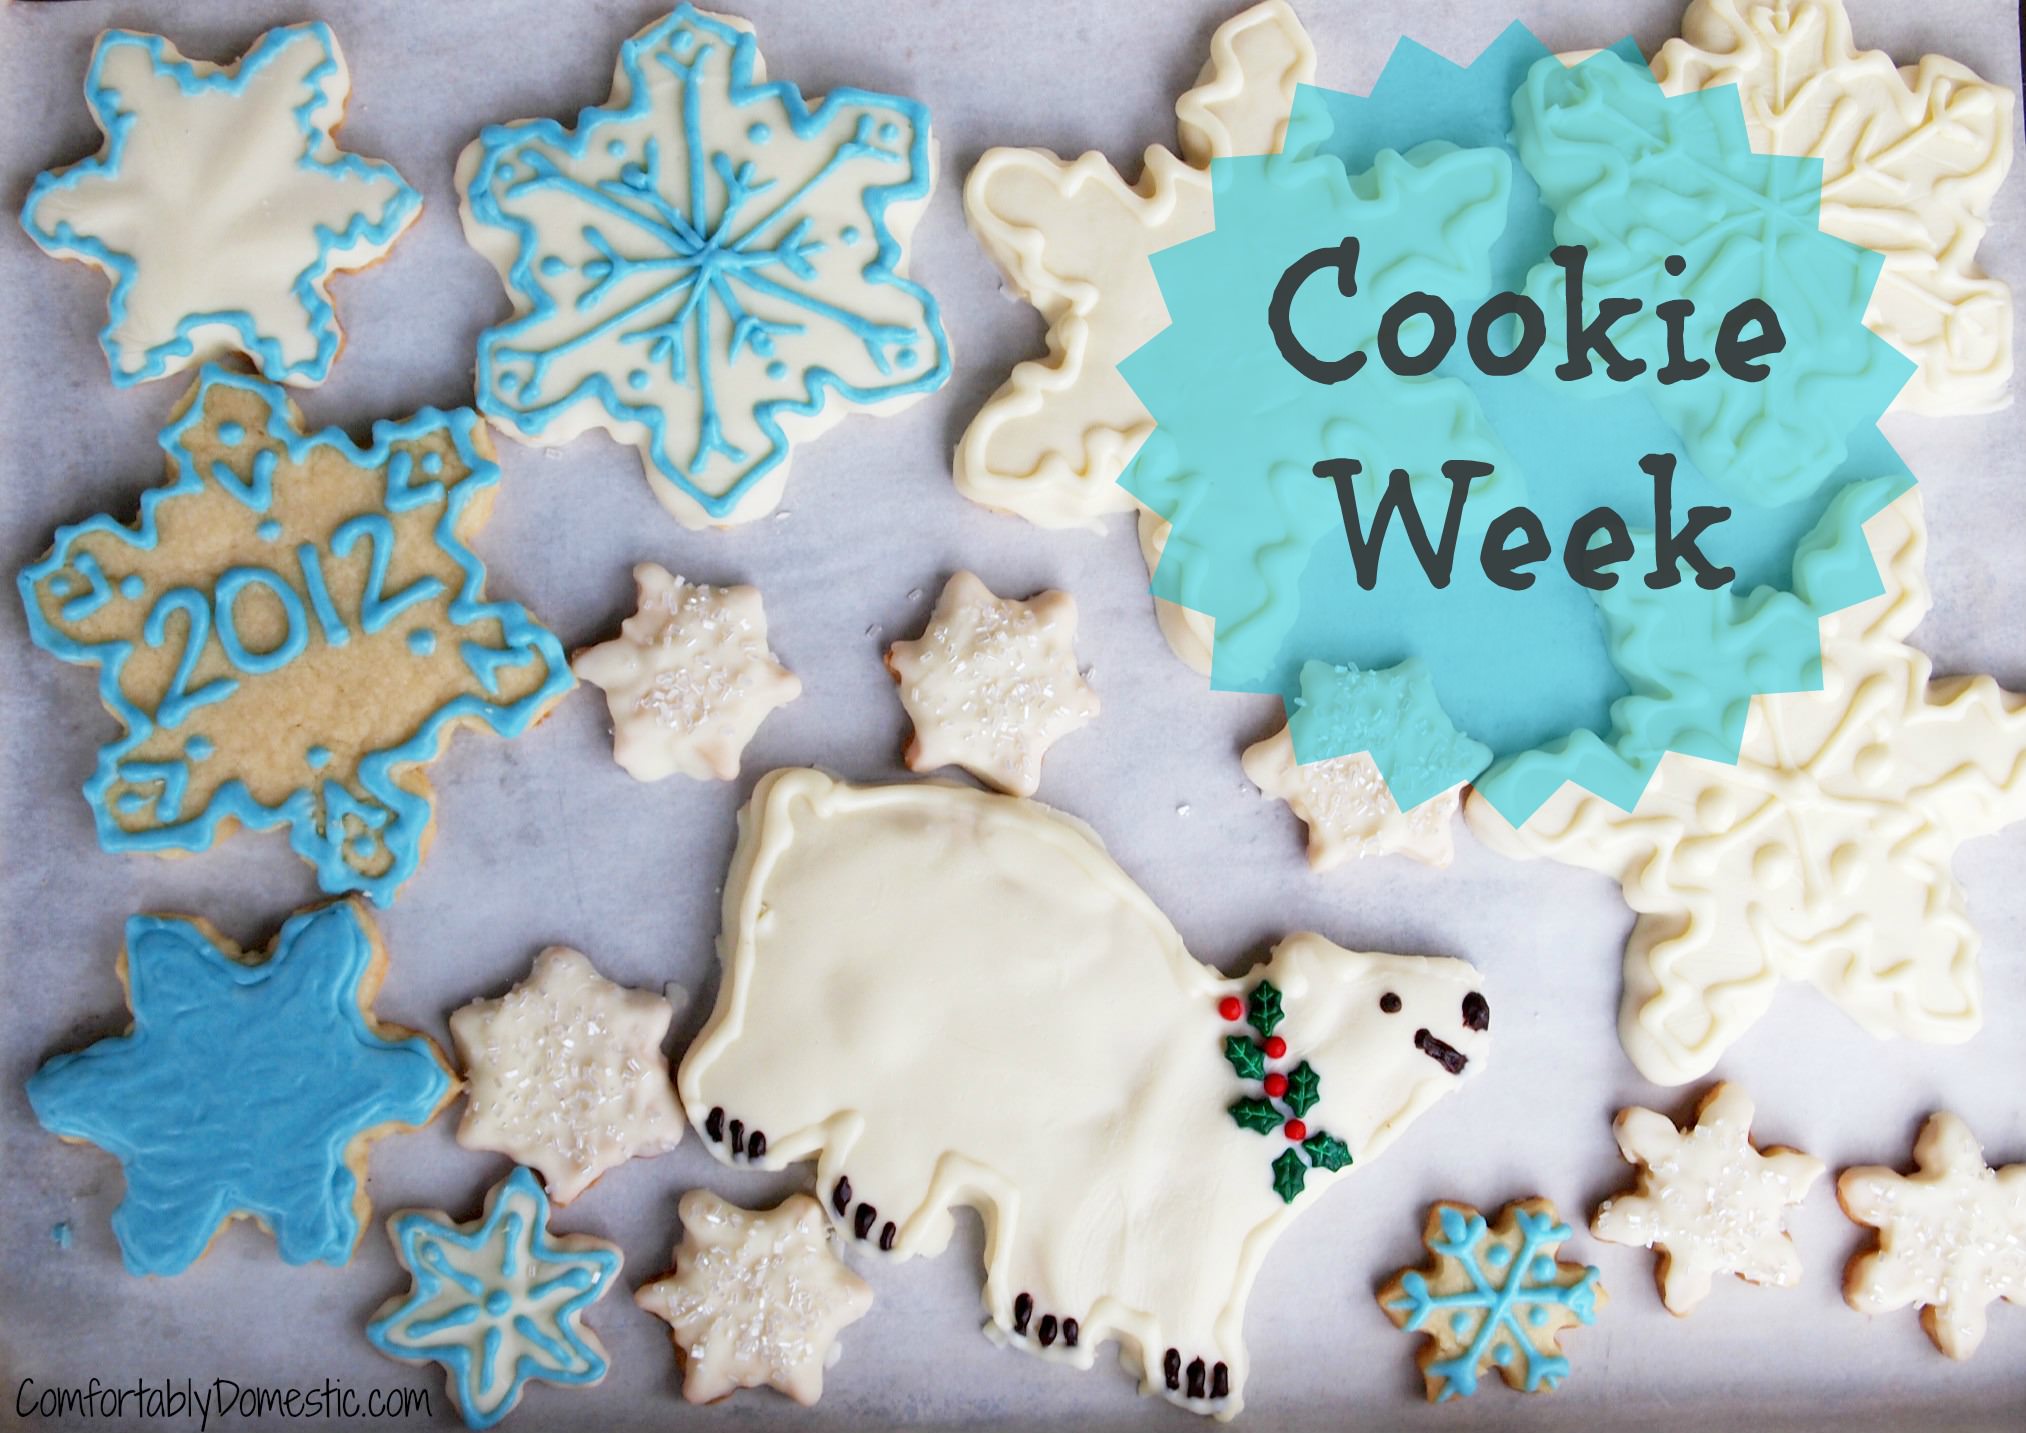 3 easy holiday cookie recipes, featuring maple bacon and chocolate are in this delicious cookie recipes post for the 4th day of Cookie Week 2012. Maple bacon and chocolate, oh my!